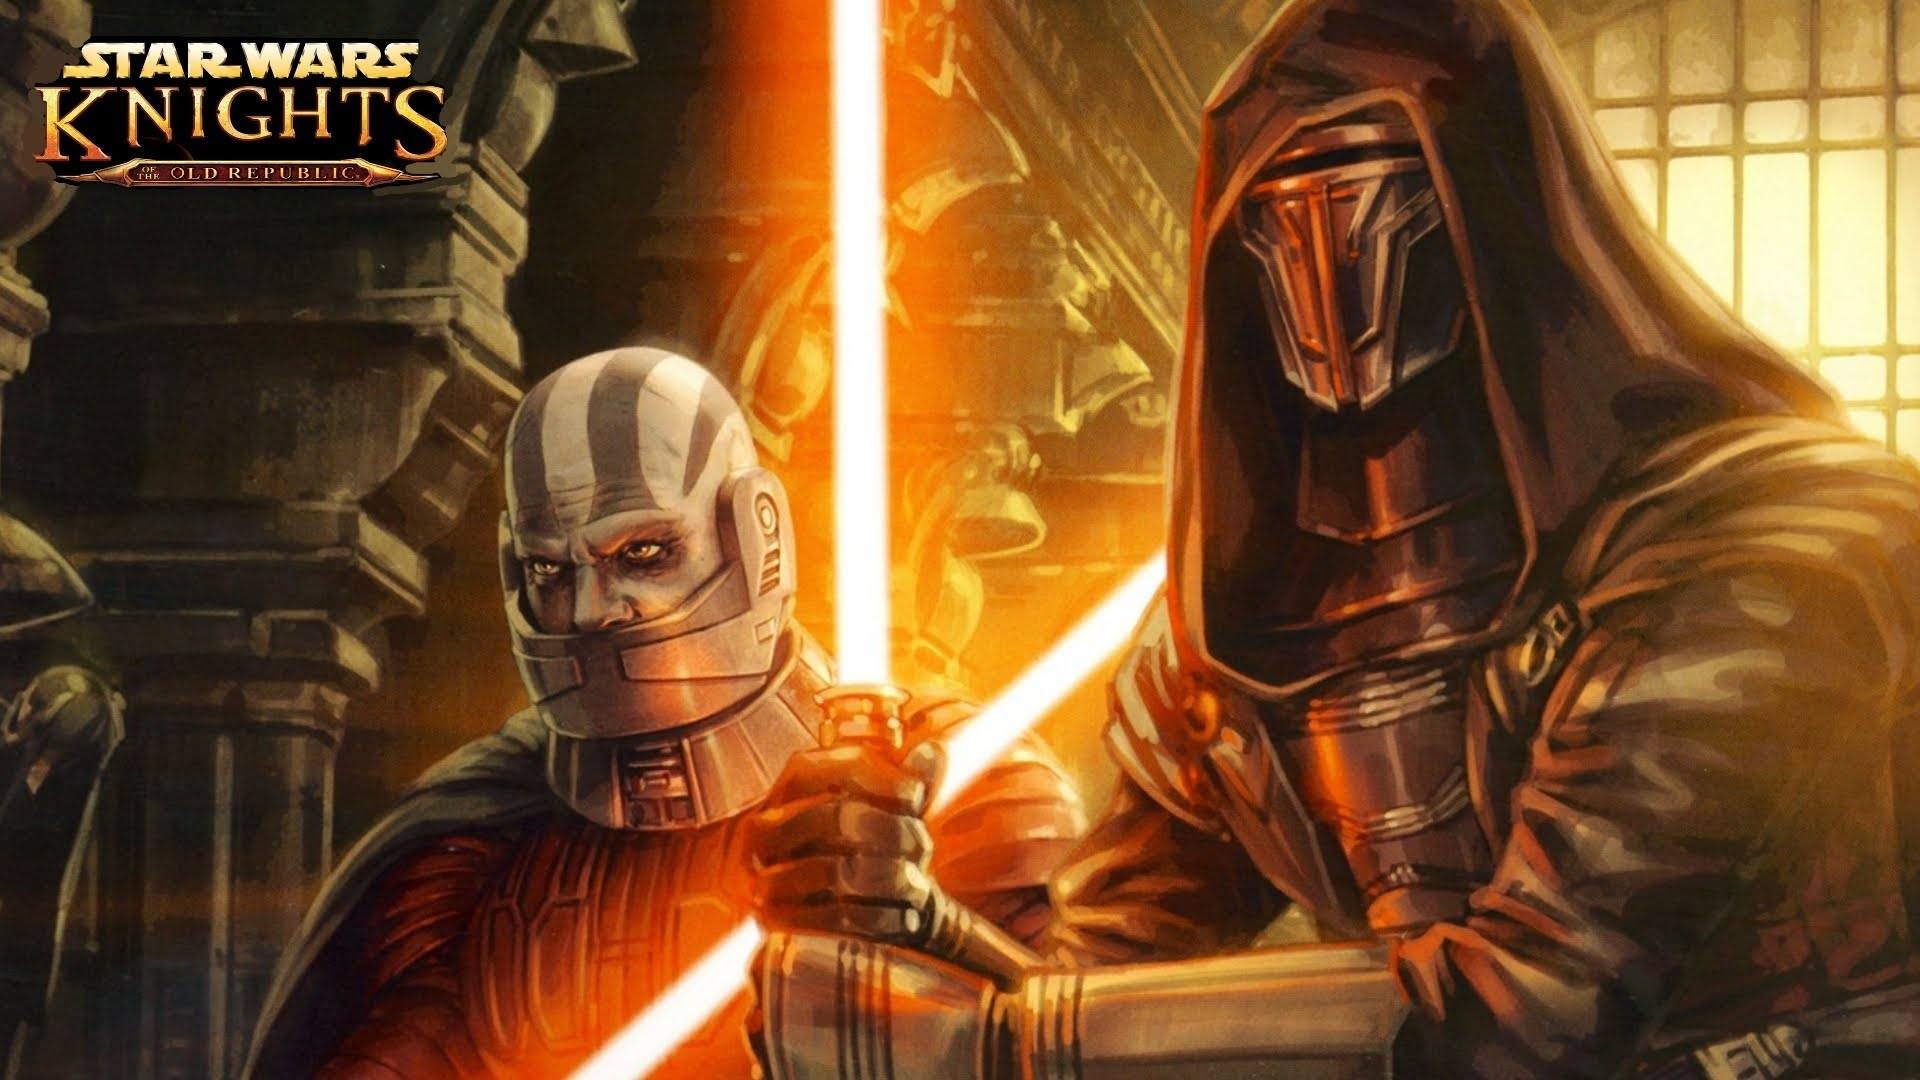 The role-playing video game Star Wars: Knights of the Old Republic